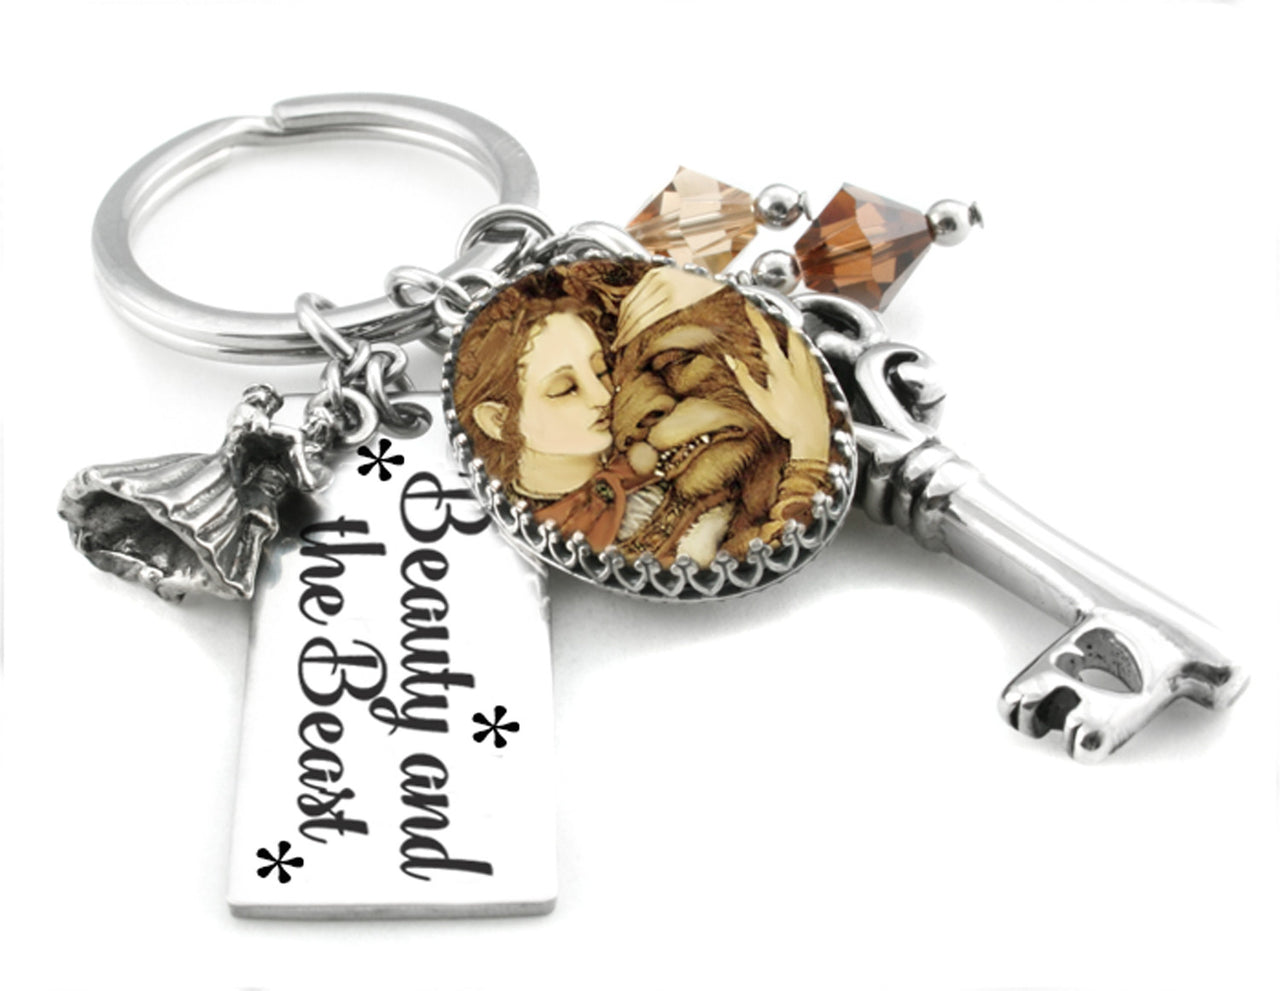 Handmade personalized key chains created in 316L stainless steel